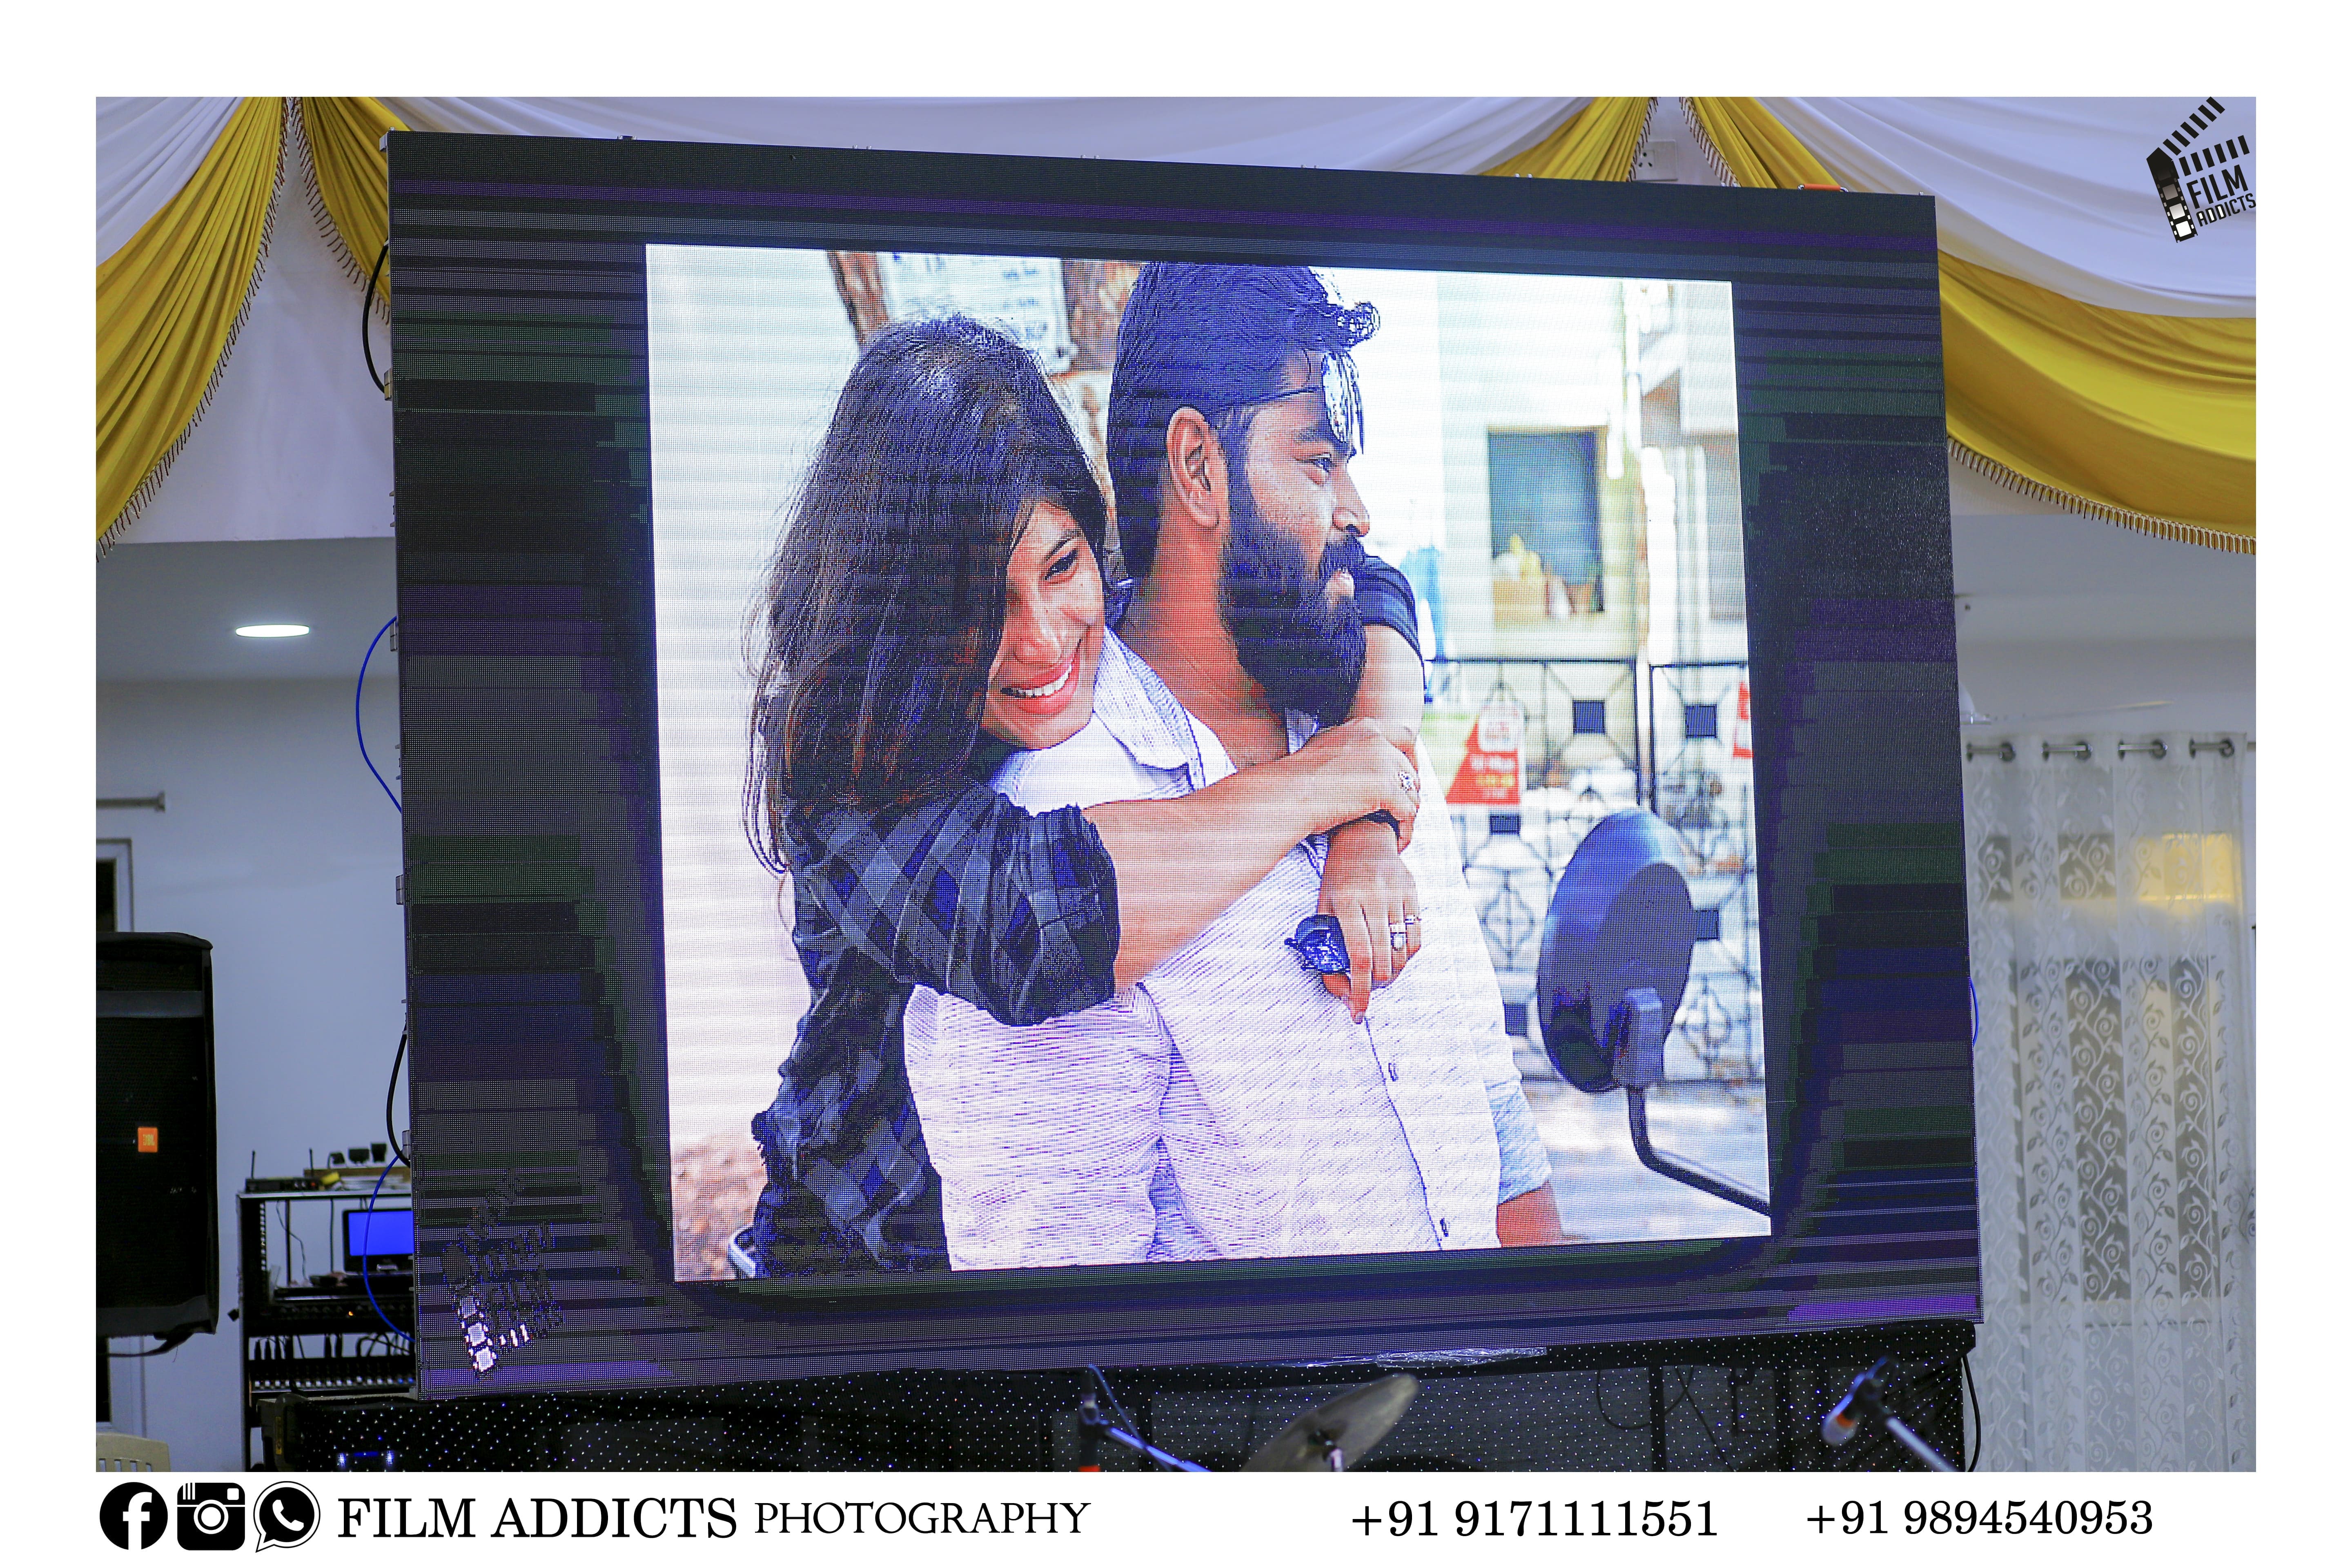 Led wall in Coimbatore, Led wall rental in Coimbatore, Led wall display in Coimbatore, Led wall wedding in Coimbatore, Led wall for wedding reception, Led wall event in Coimbatore, Led wall event management in Coimbatore, Led video wall for events in Coimbatore, led video wall rental in Coimbatore, wedding led video wall rental & hiring Coimbatore, marriage led video wall rental & hiring in Coimbatore, wedding led screen rental Coimbatore, marriage led screen Coimbatore, indoor & outdoor led video wall in Coimbatore, led wall in marriage, led wall rental in Coimbatore, led rental, led video wall hiring Coimbatore, marriage led screen, wedding led screen rental,live streaming in Coimbatore, live streaming, live tv, live streaming wedding, wedding live streaming Coimbatore, marriage live streaming Coimbatore, live streaming services in Coimbatore, live streaming wedding Coimbatore.